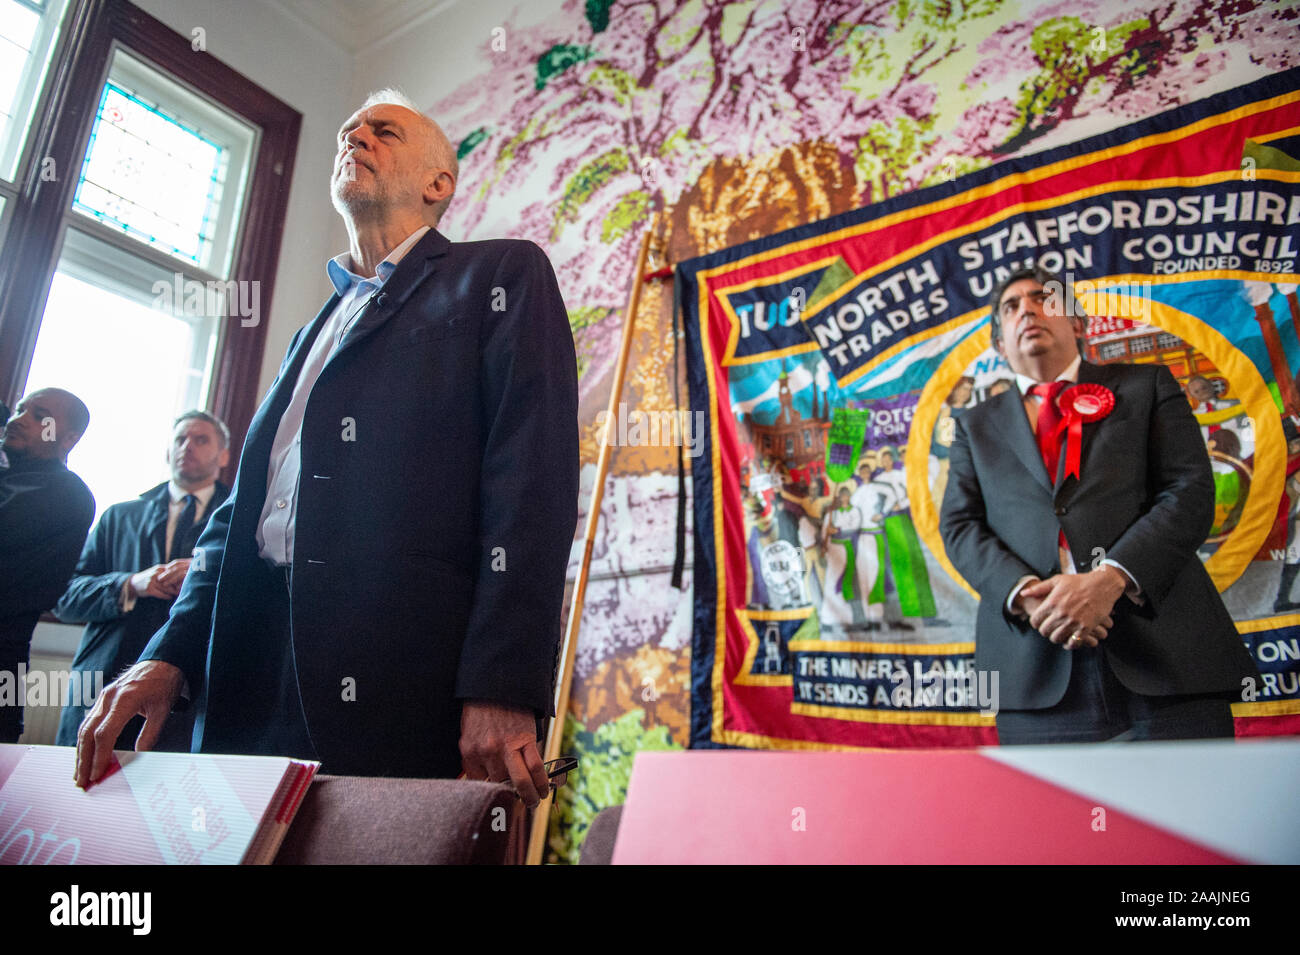 Staffordshire, UK. 22 November 2019. Labour leader Jeremy Corbyn at a Labour rally in Fenton, Stoke-on-Trent with Stoke South labour candidate Mark McDonald (right). The Stoke South seat is marginal with the Conservatives holding a majority of just over 600 votes. Credit: Benjamin Wareing/ Alamy Live News Stock Photo